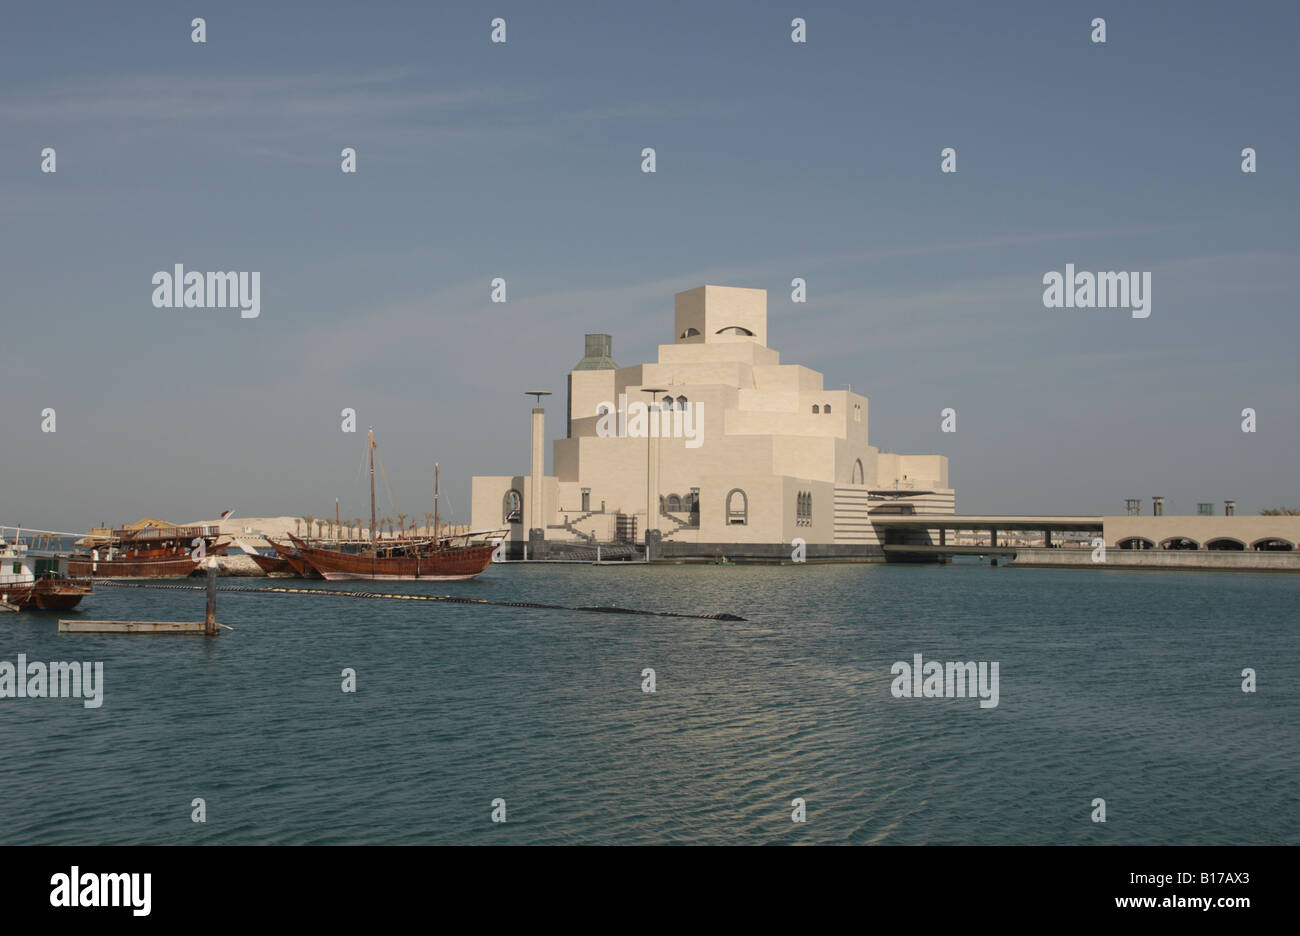 Museum of Islamic Art in Doha,Qatar, build by the architect I.M.Pei. Stock Photo